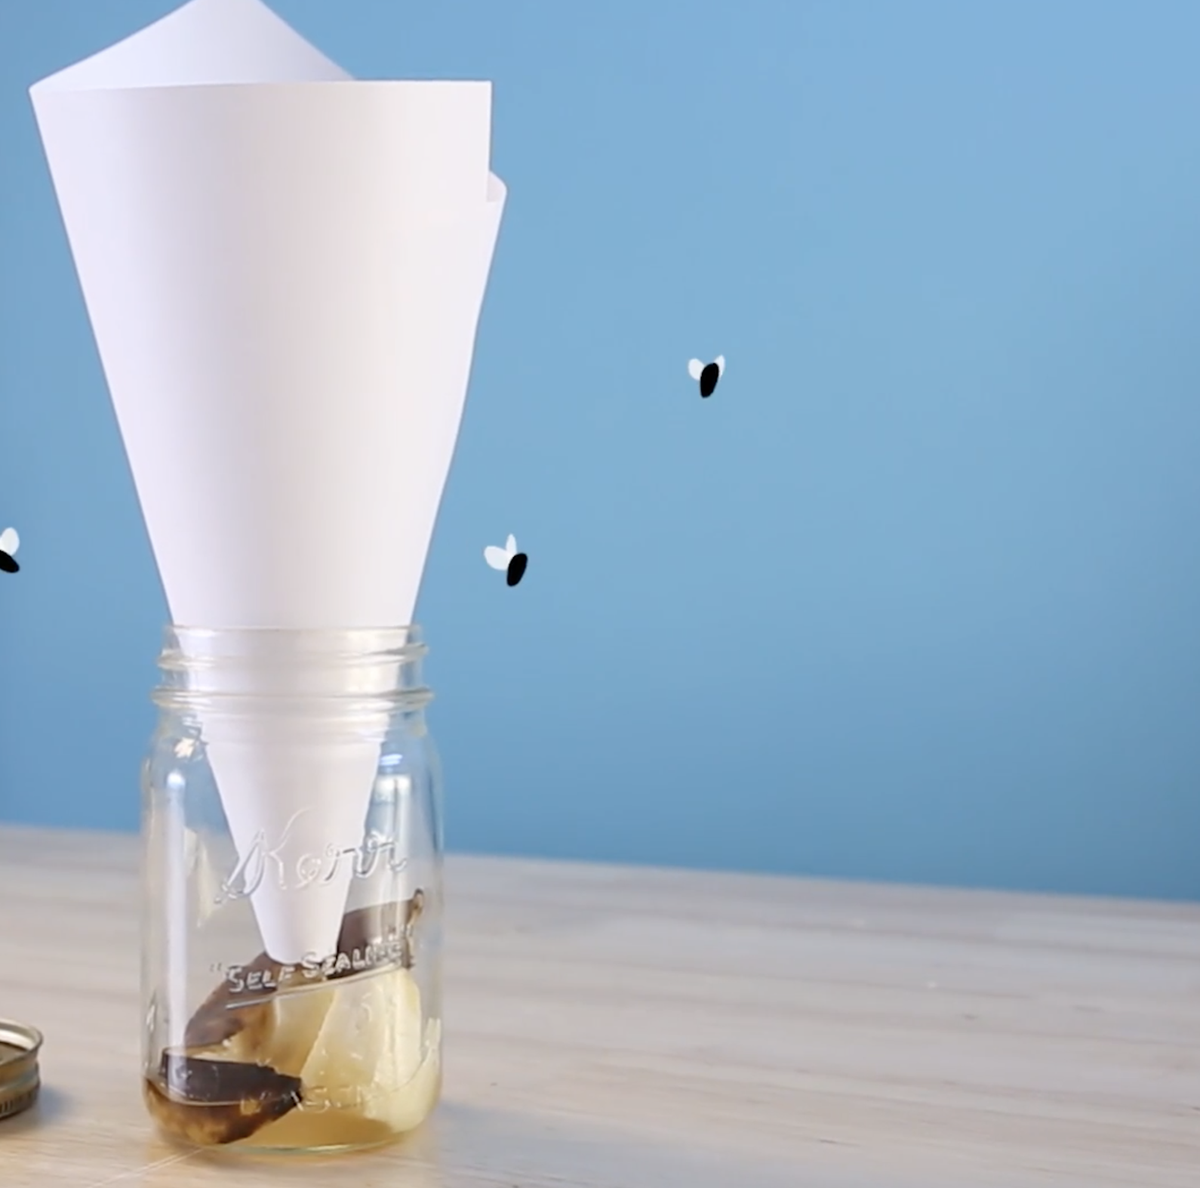 https://hips.hearstapps.com/hmg-prod/images/how-to-kill-fruit-flies-paper-cone-mason-jar-64df9fd53c54d.png?crop=0.564xw:1.00xh;0.0449xw,0&resize=1200:*